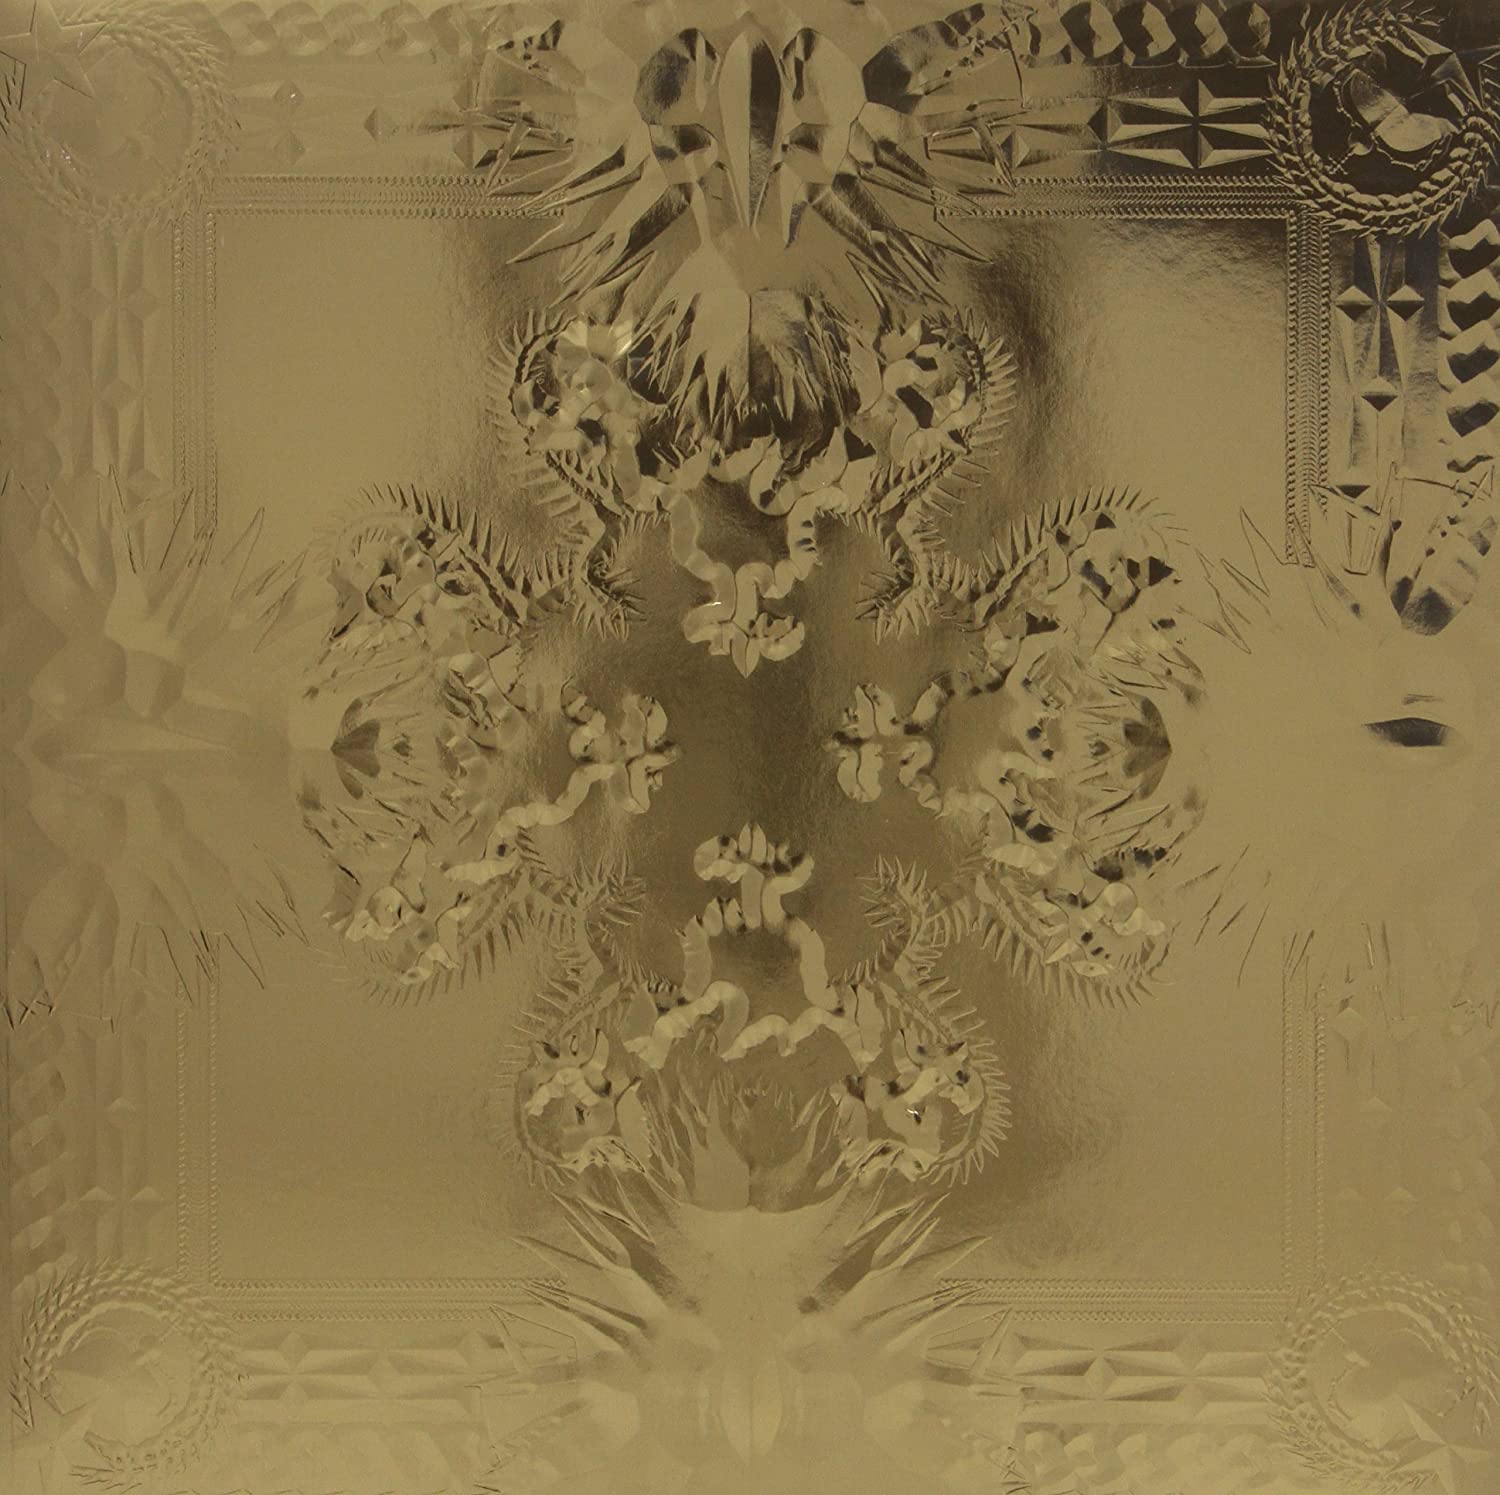 West, Kanye & Jay Z/Watch The Throne [LP]